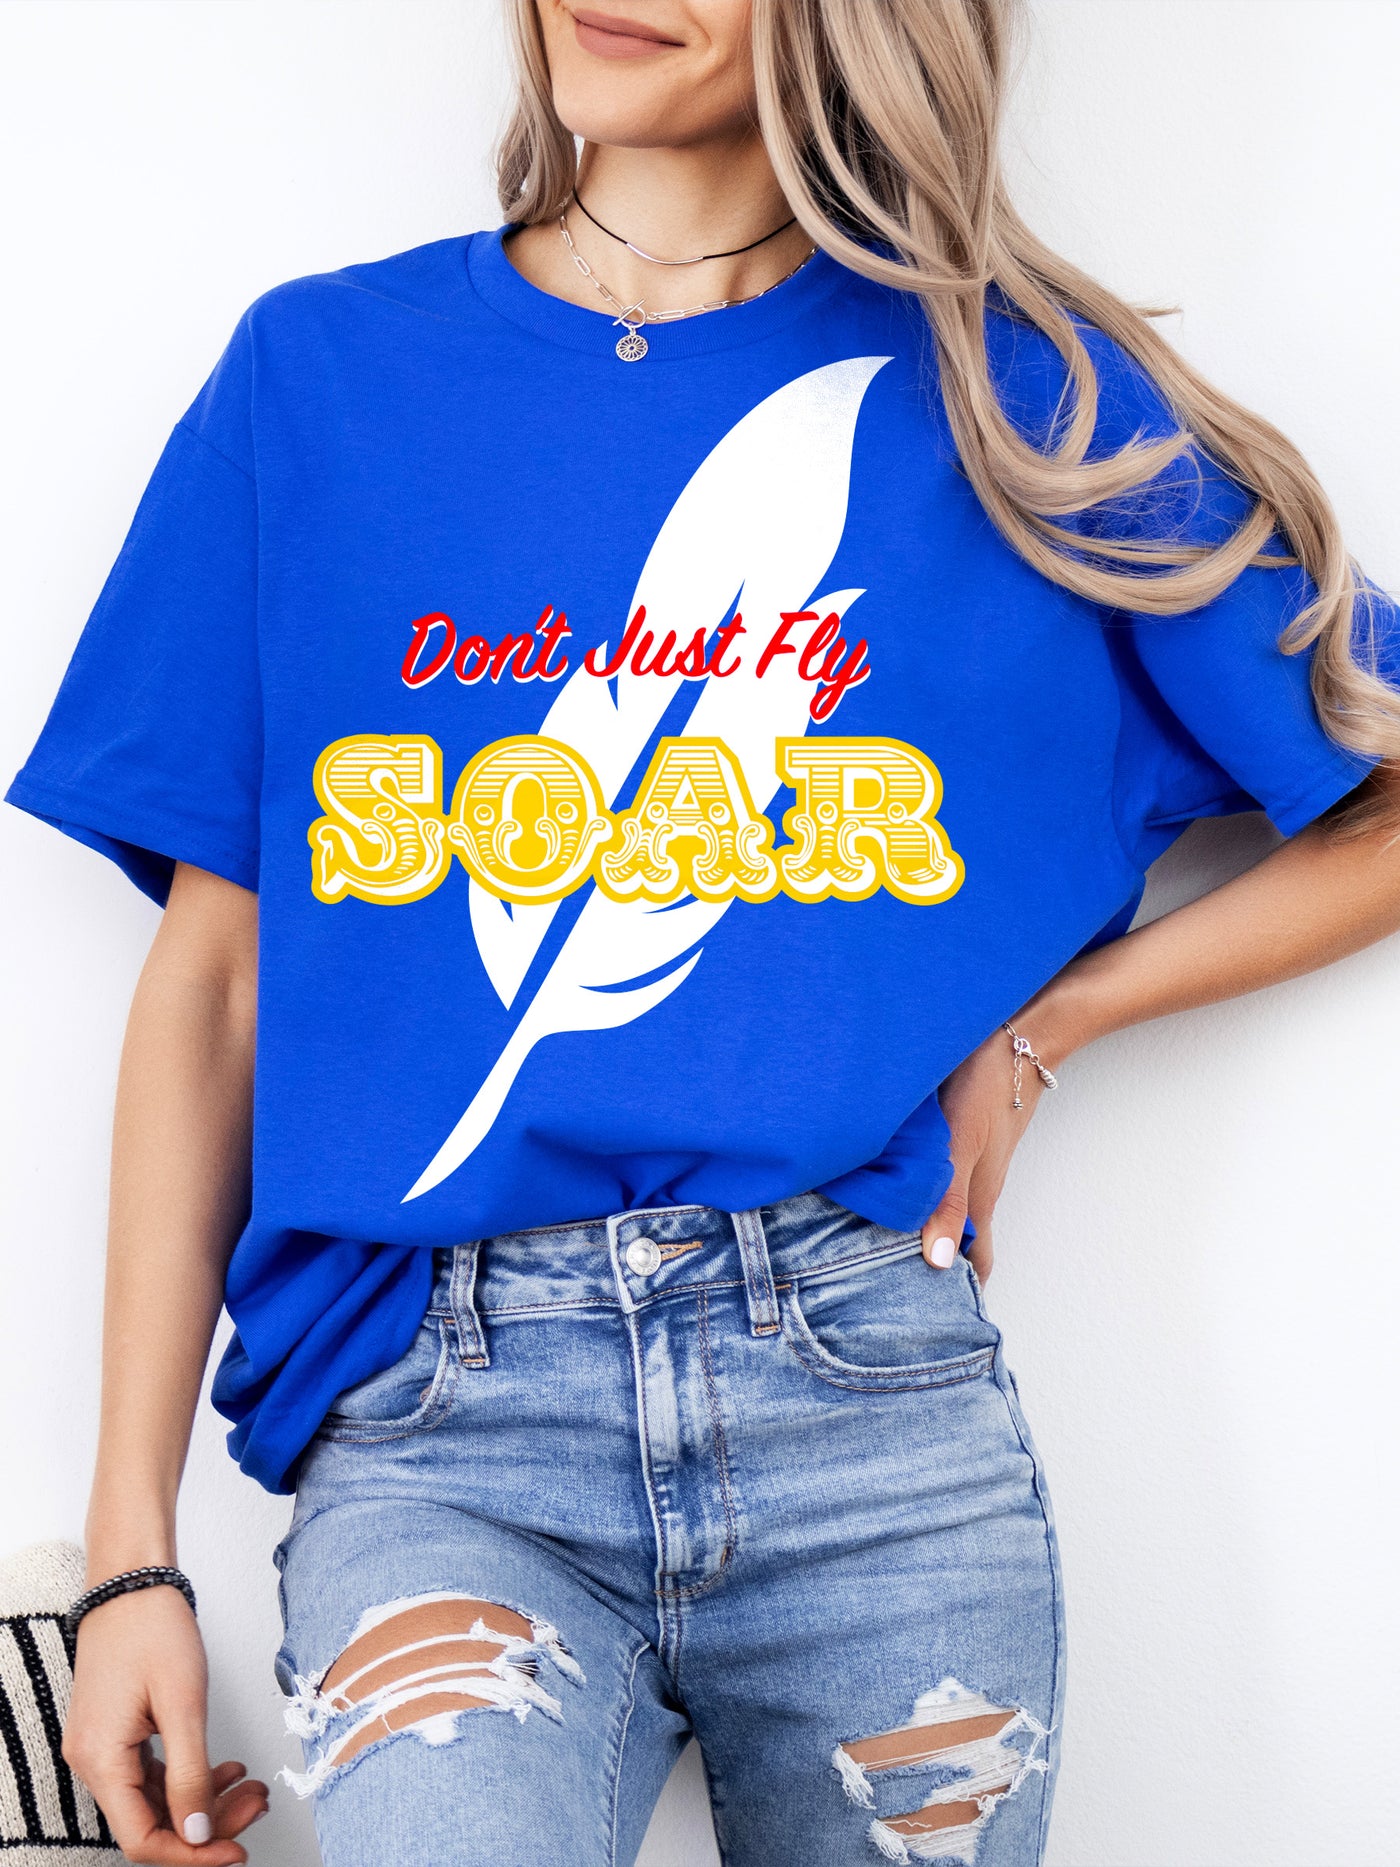 Don't Just Fly, Soar Shirt